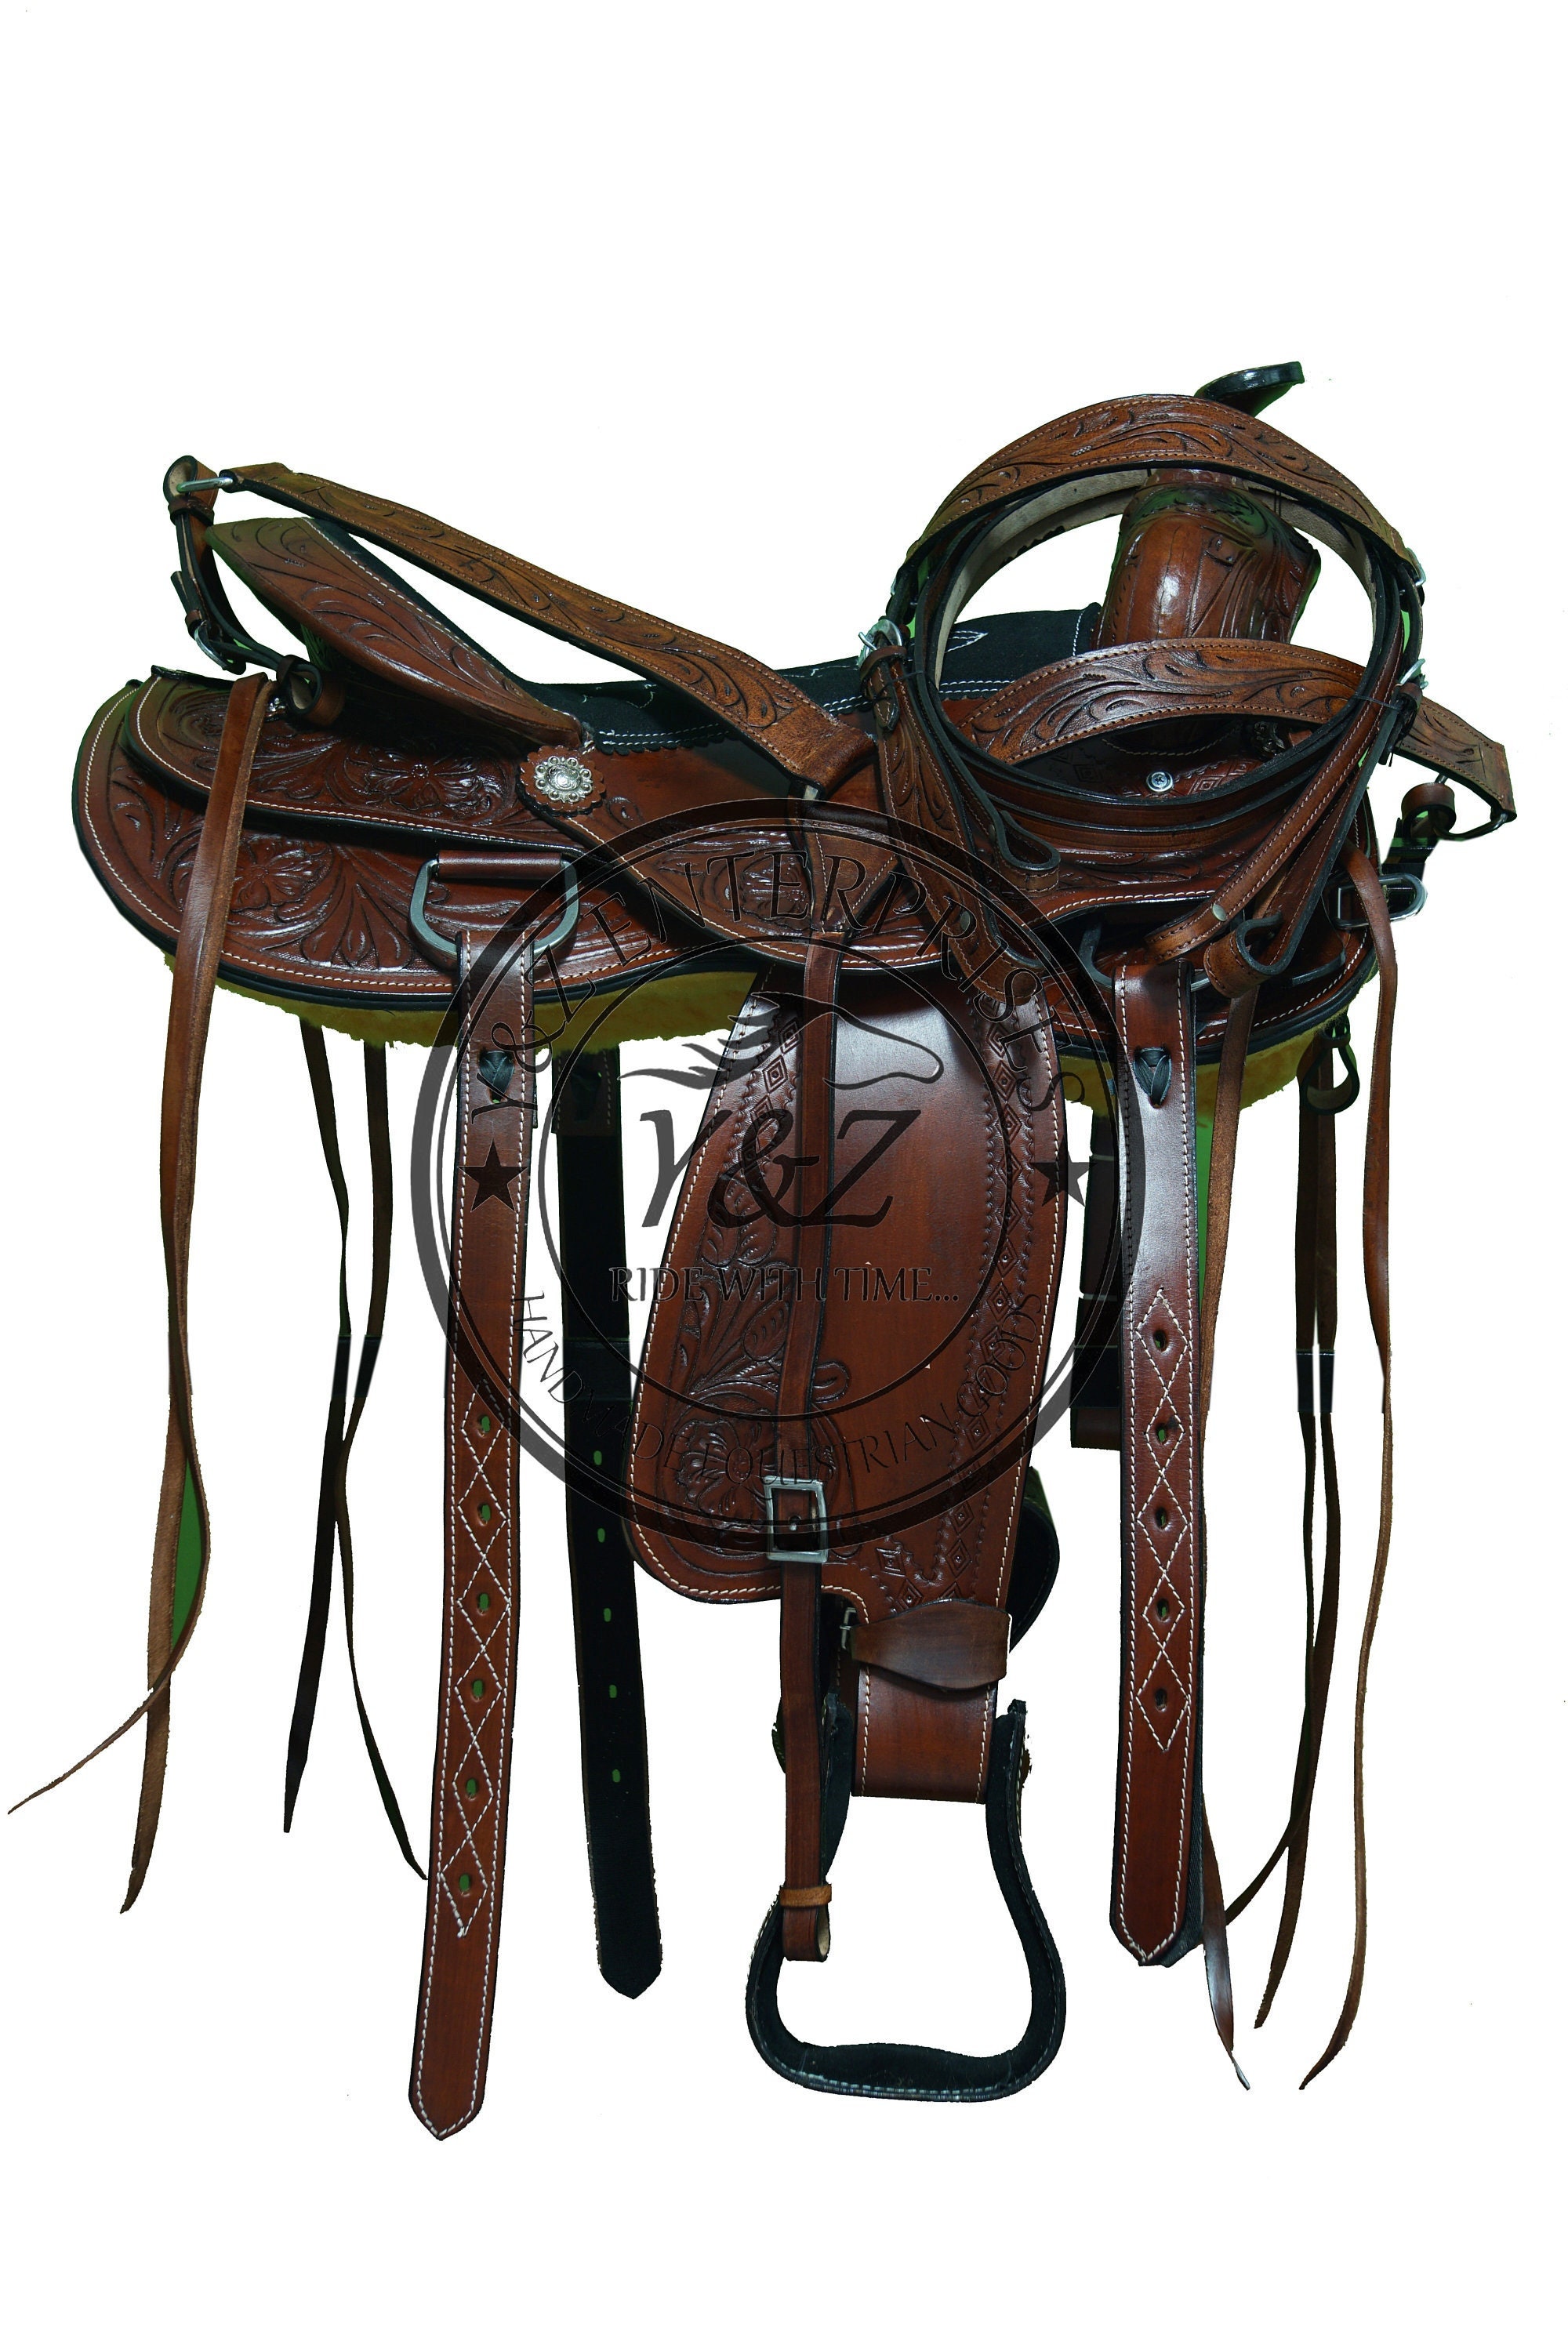 Details about   Youth Child All Purpose Synthetic Treeless Freemax English Horse Saddle,10 to 13 